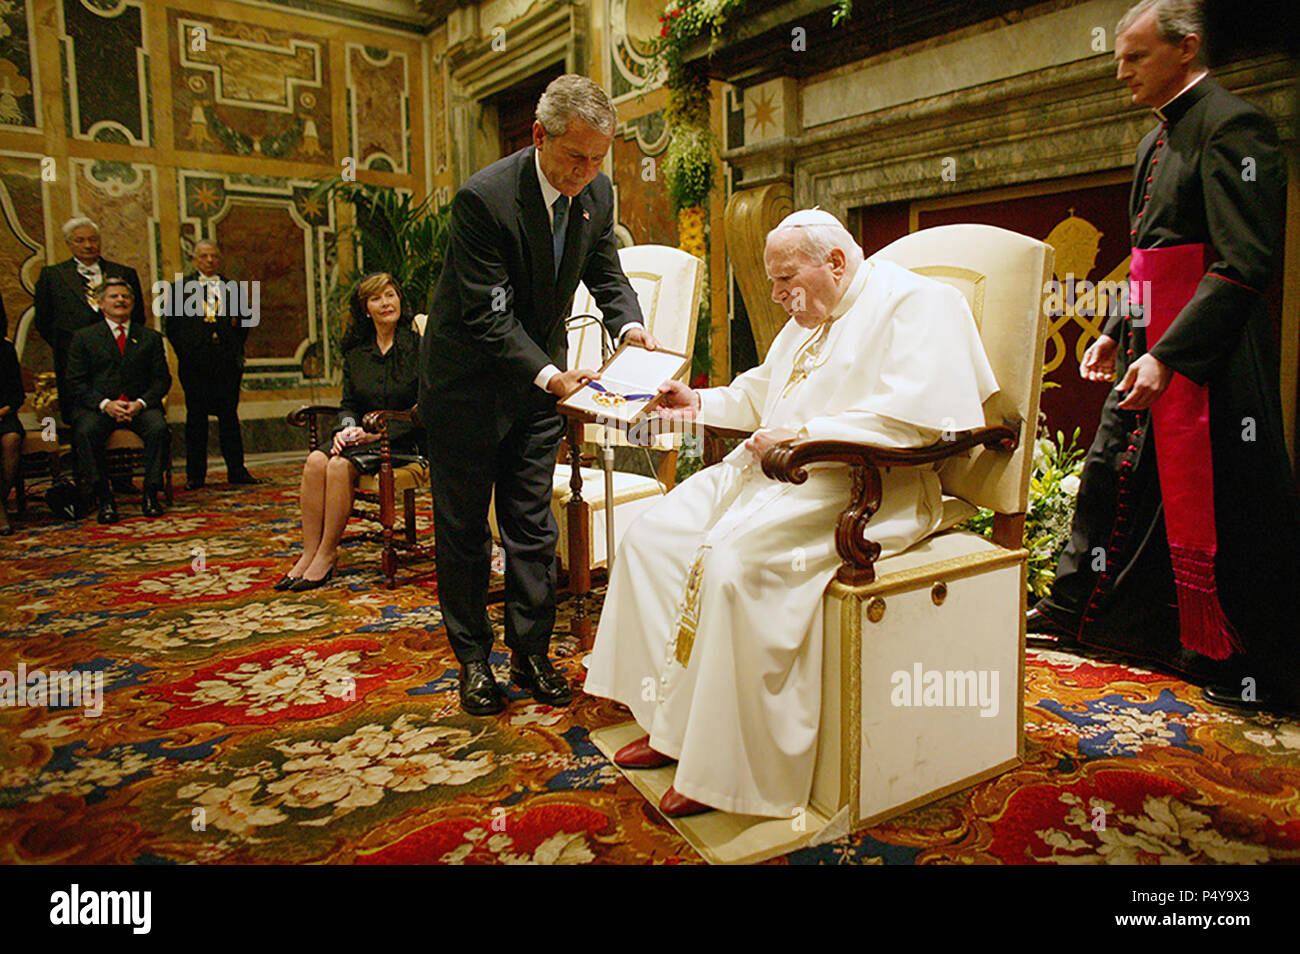 President George W. Bush presents the Medal of Freedom to Pope John Paul II June 4, 2004, during a visit to the Vatican in Rome, Italy.  Photo by Eric Draper, Courtesy of the George W. Bush Presidential Library and Museum Stock Photo